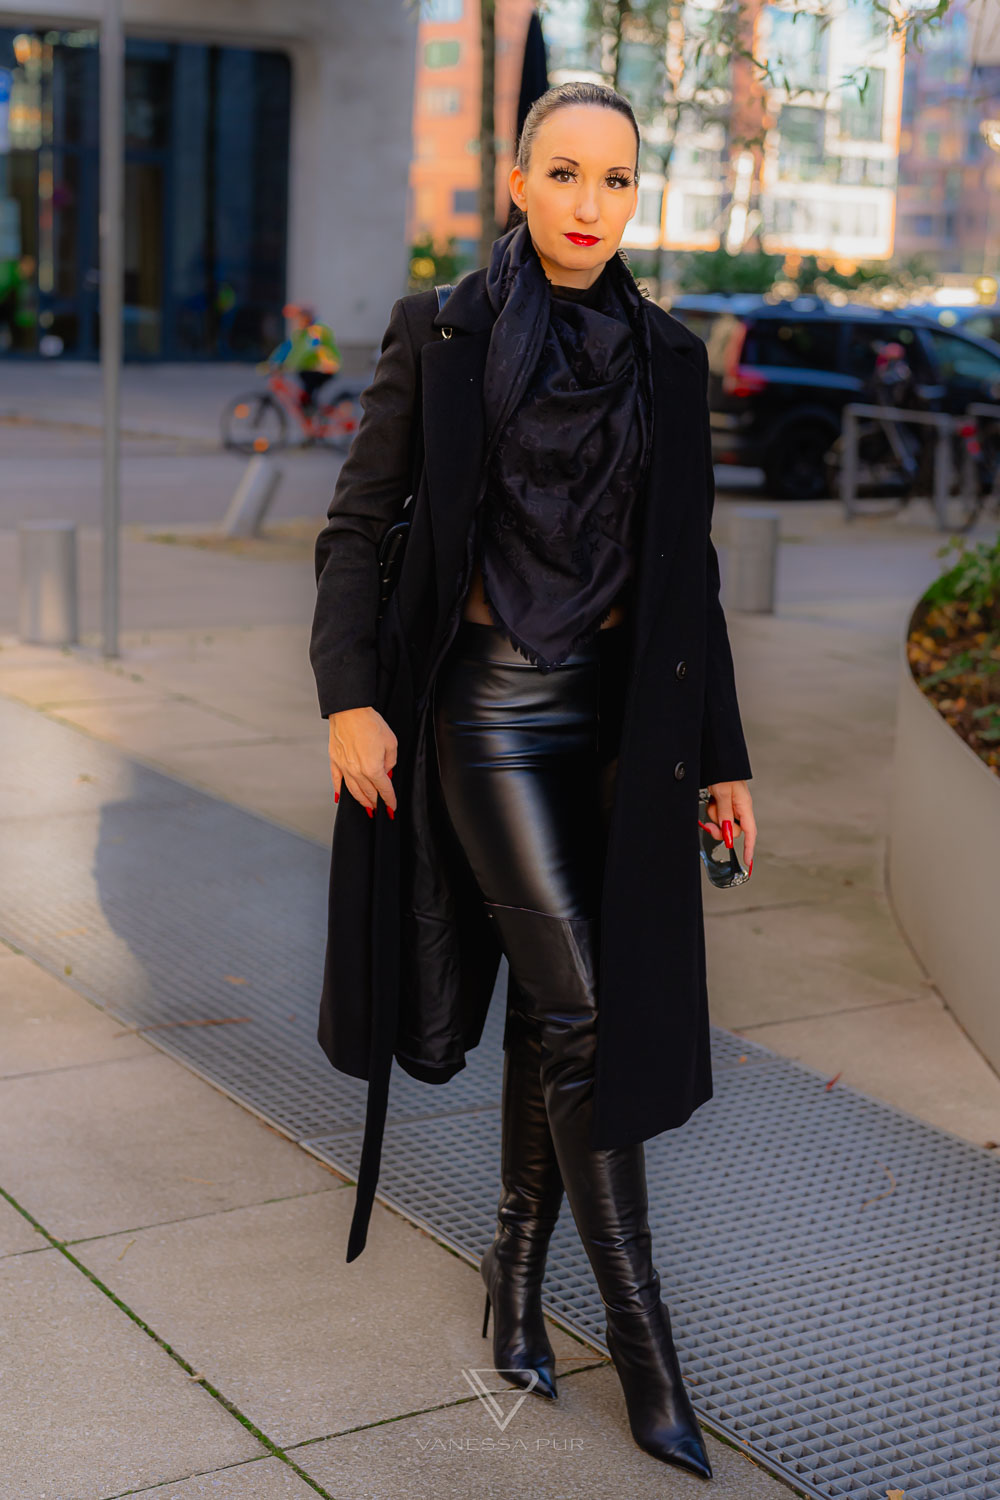 Vanessa Pur - Shopping in Hamburg - leather pants - otk boots - How to wear boots in autumn and winter and combine them properly with latest trends. Over the knee boots, knee high boots, thigh high boots, otk